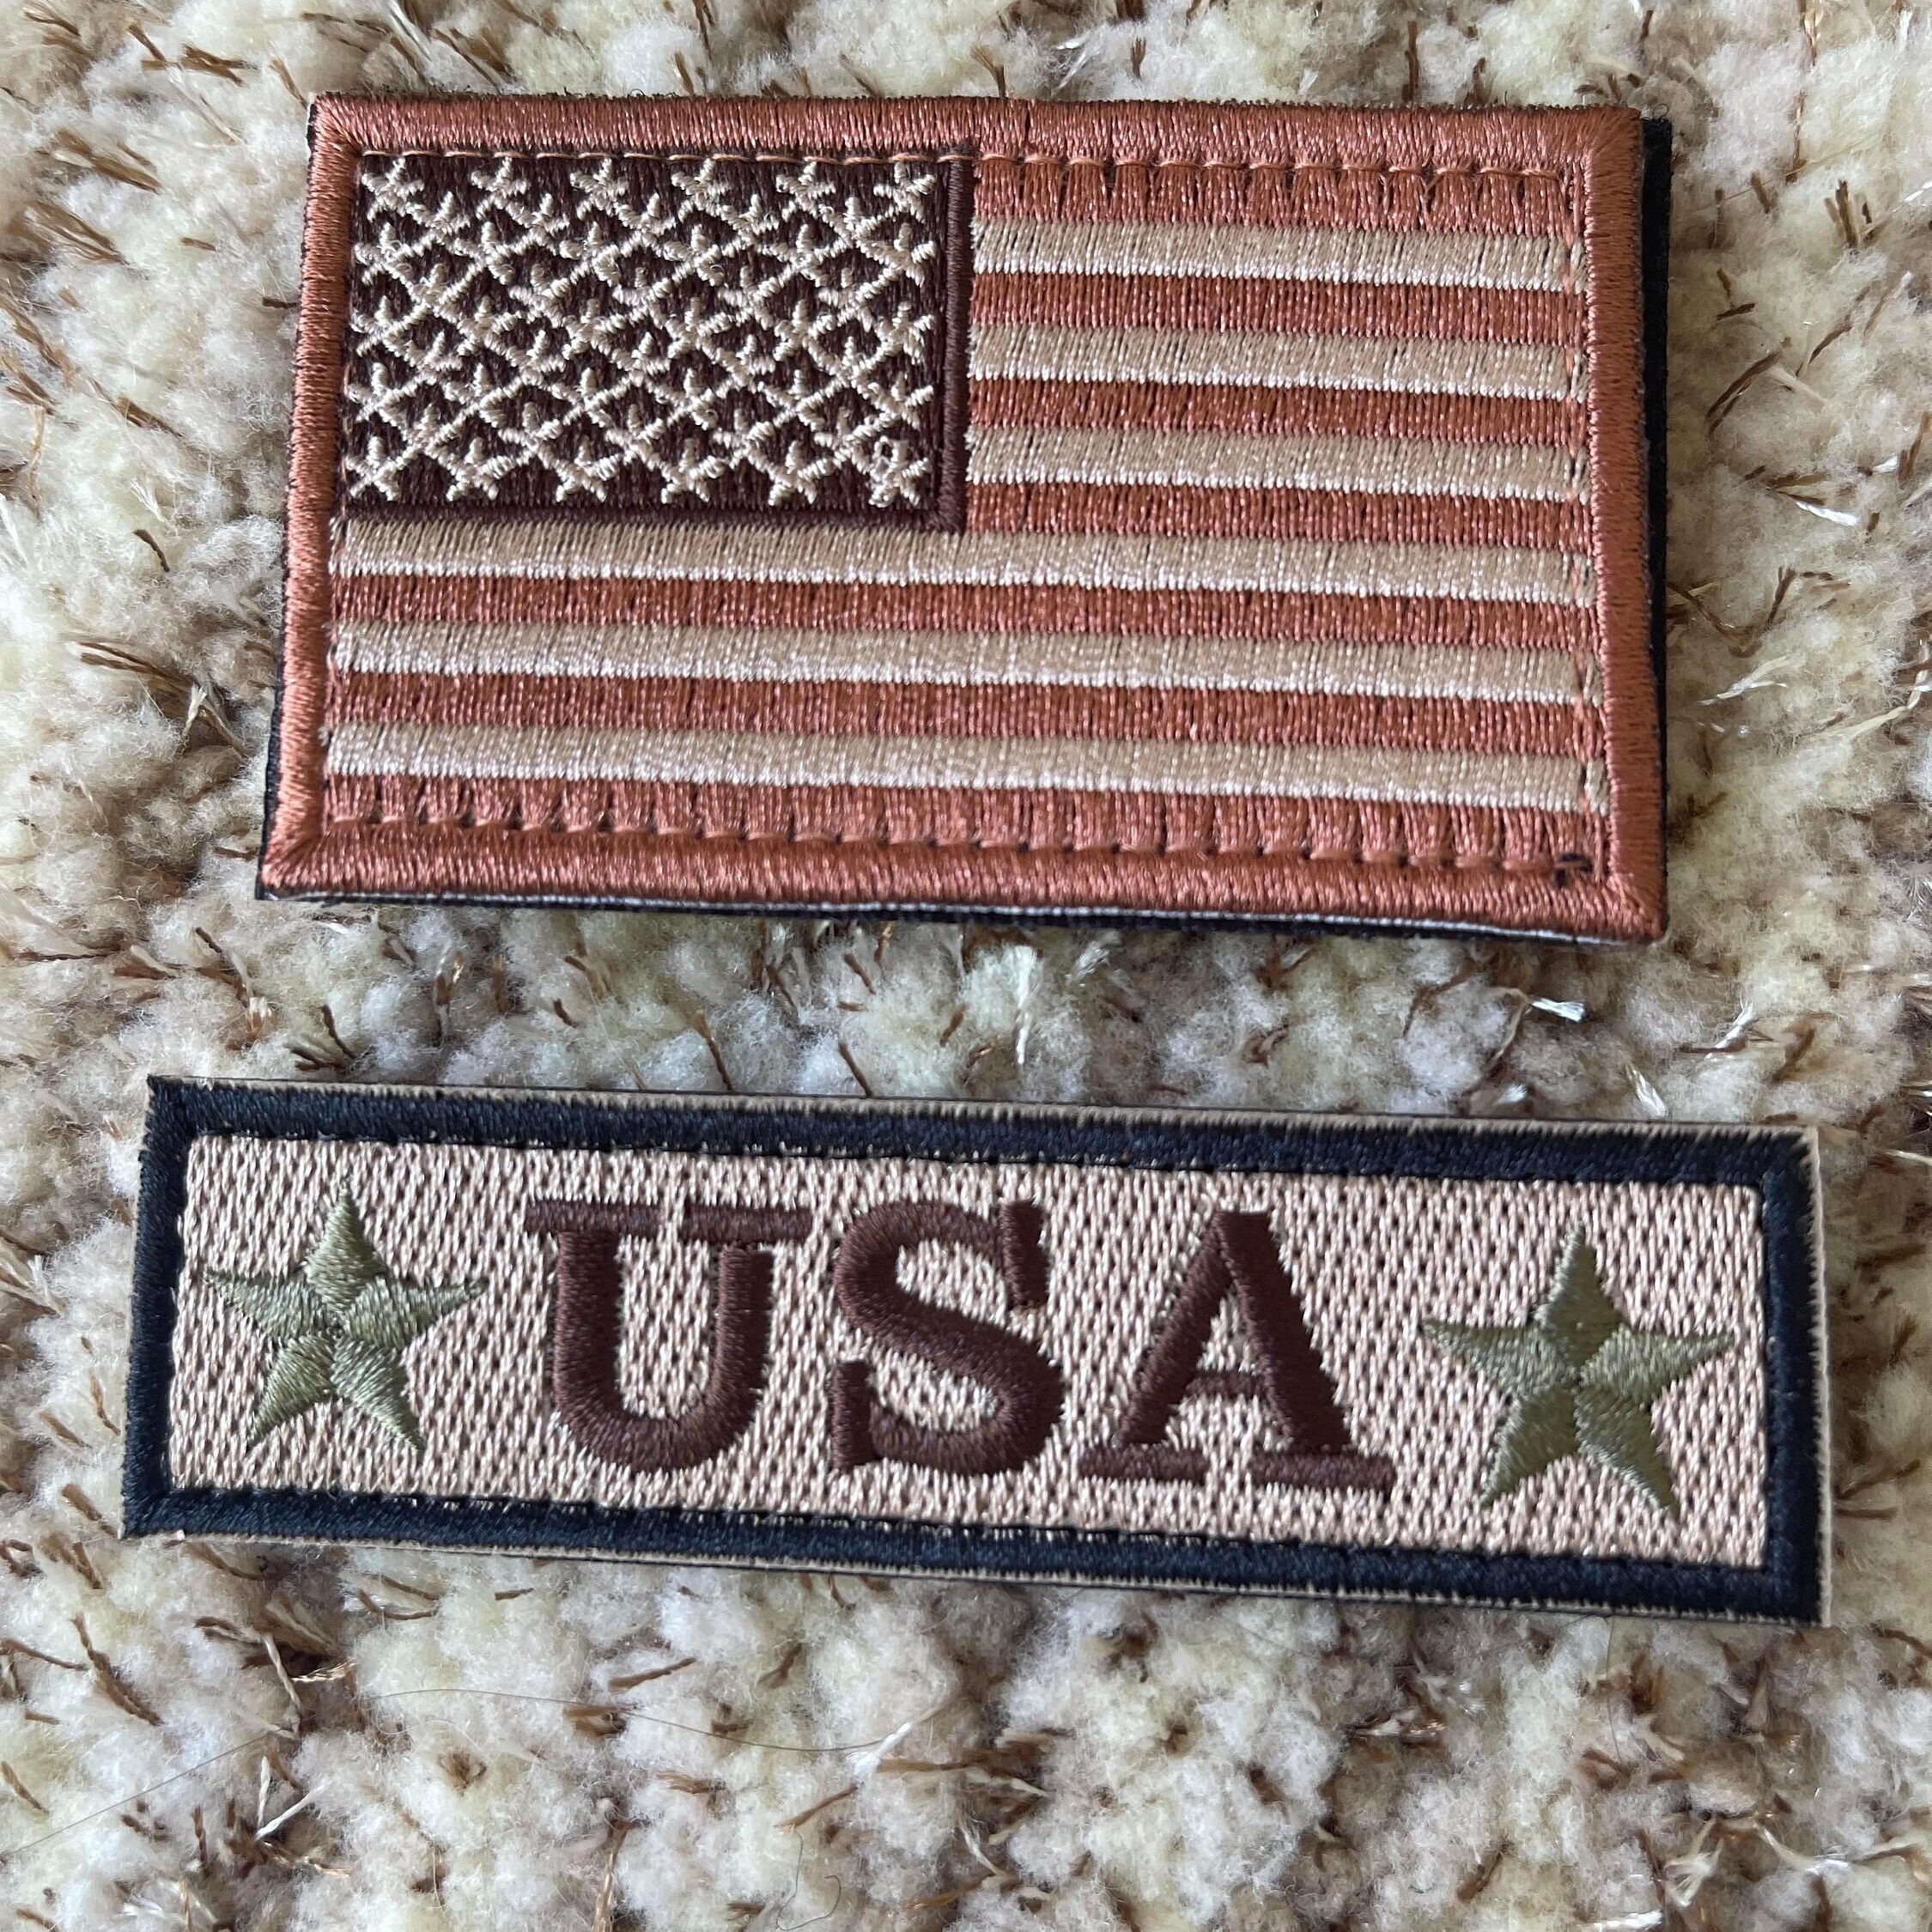 USA US American Flag Black & Grey Embroidered Patch Iron On/sew On